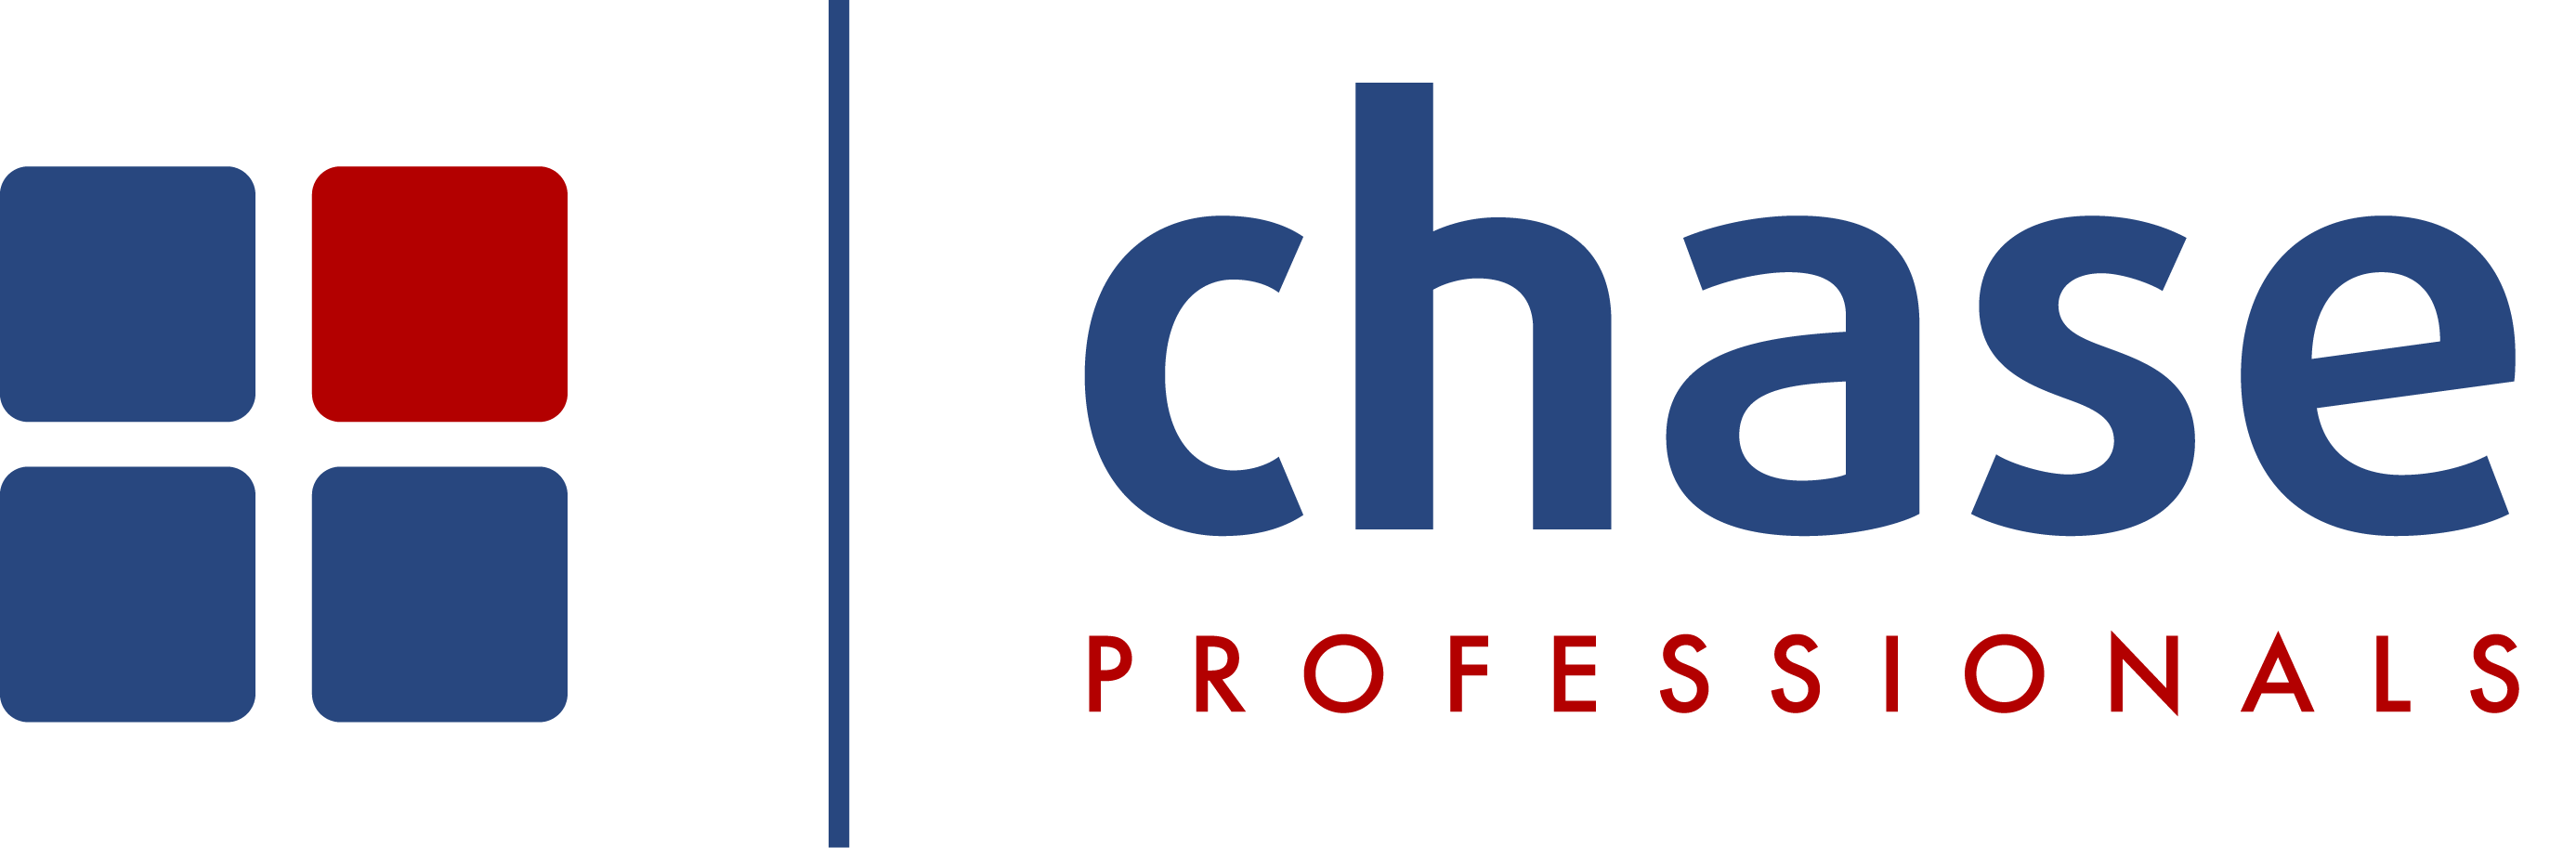 Current Chase Logo - jared4chasestaffing. IT sourcing and recruiting